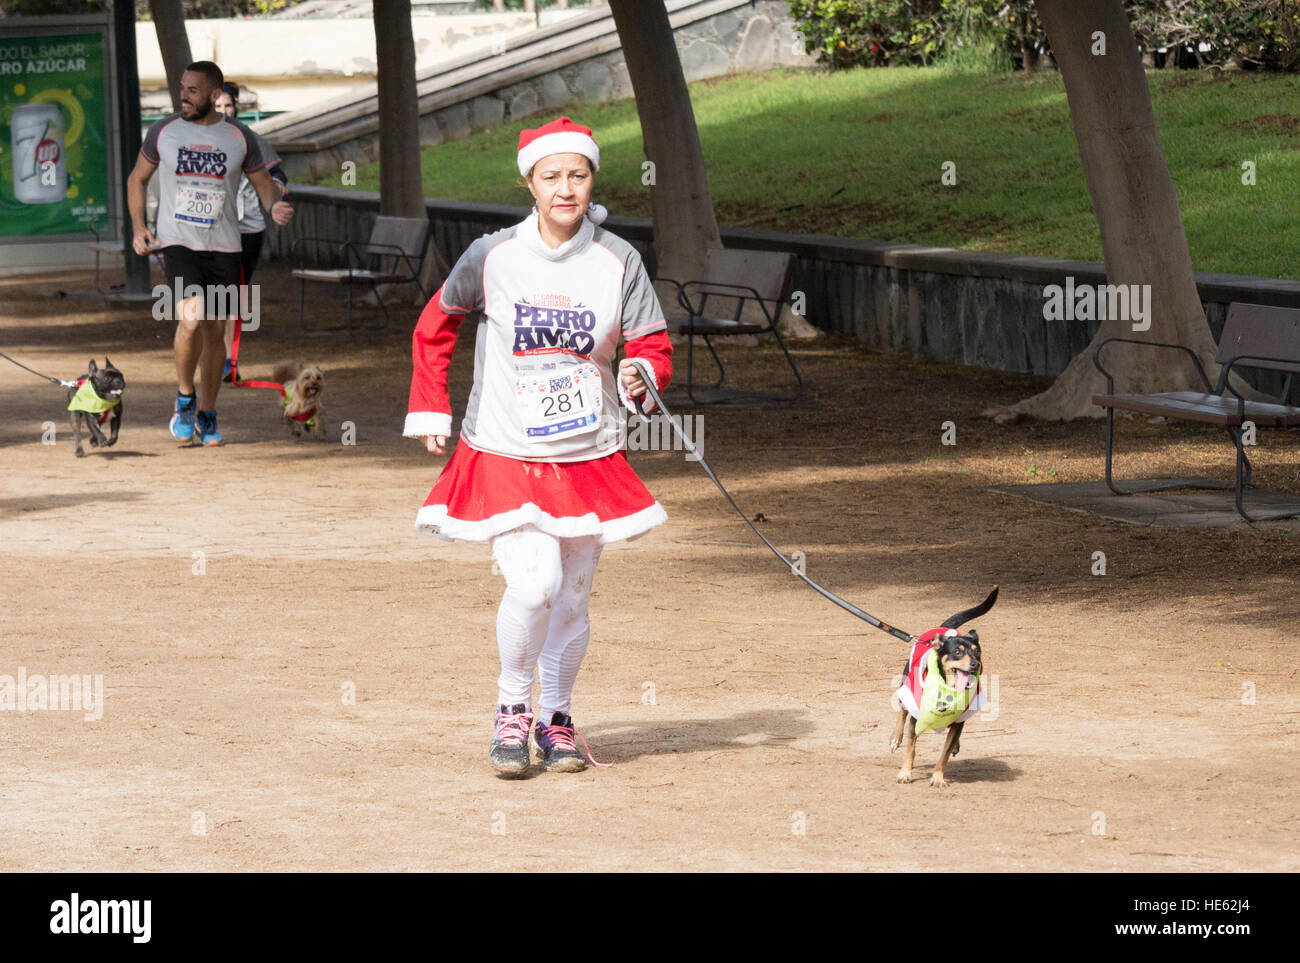 Las Palmas, Gran Canaria, Canary Islands, Spain. 18th December, 2016. Weather: Christmas fun run for dog owners in aid of local dogs home, raising awareness of the amount of dogs given as presents and abandoned soon after Christmas. Credit: Alan Dawson News/Alamy Live News Stock Photo